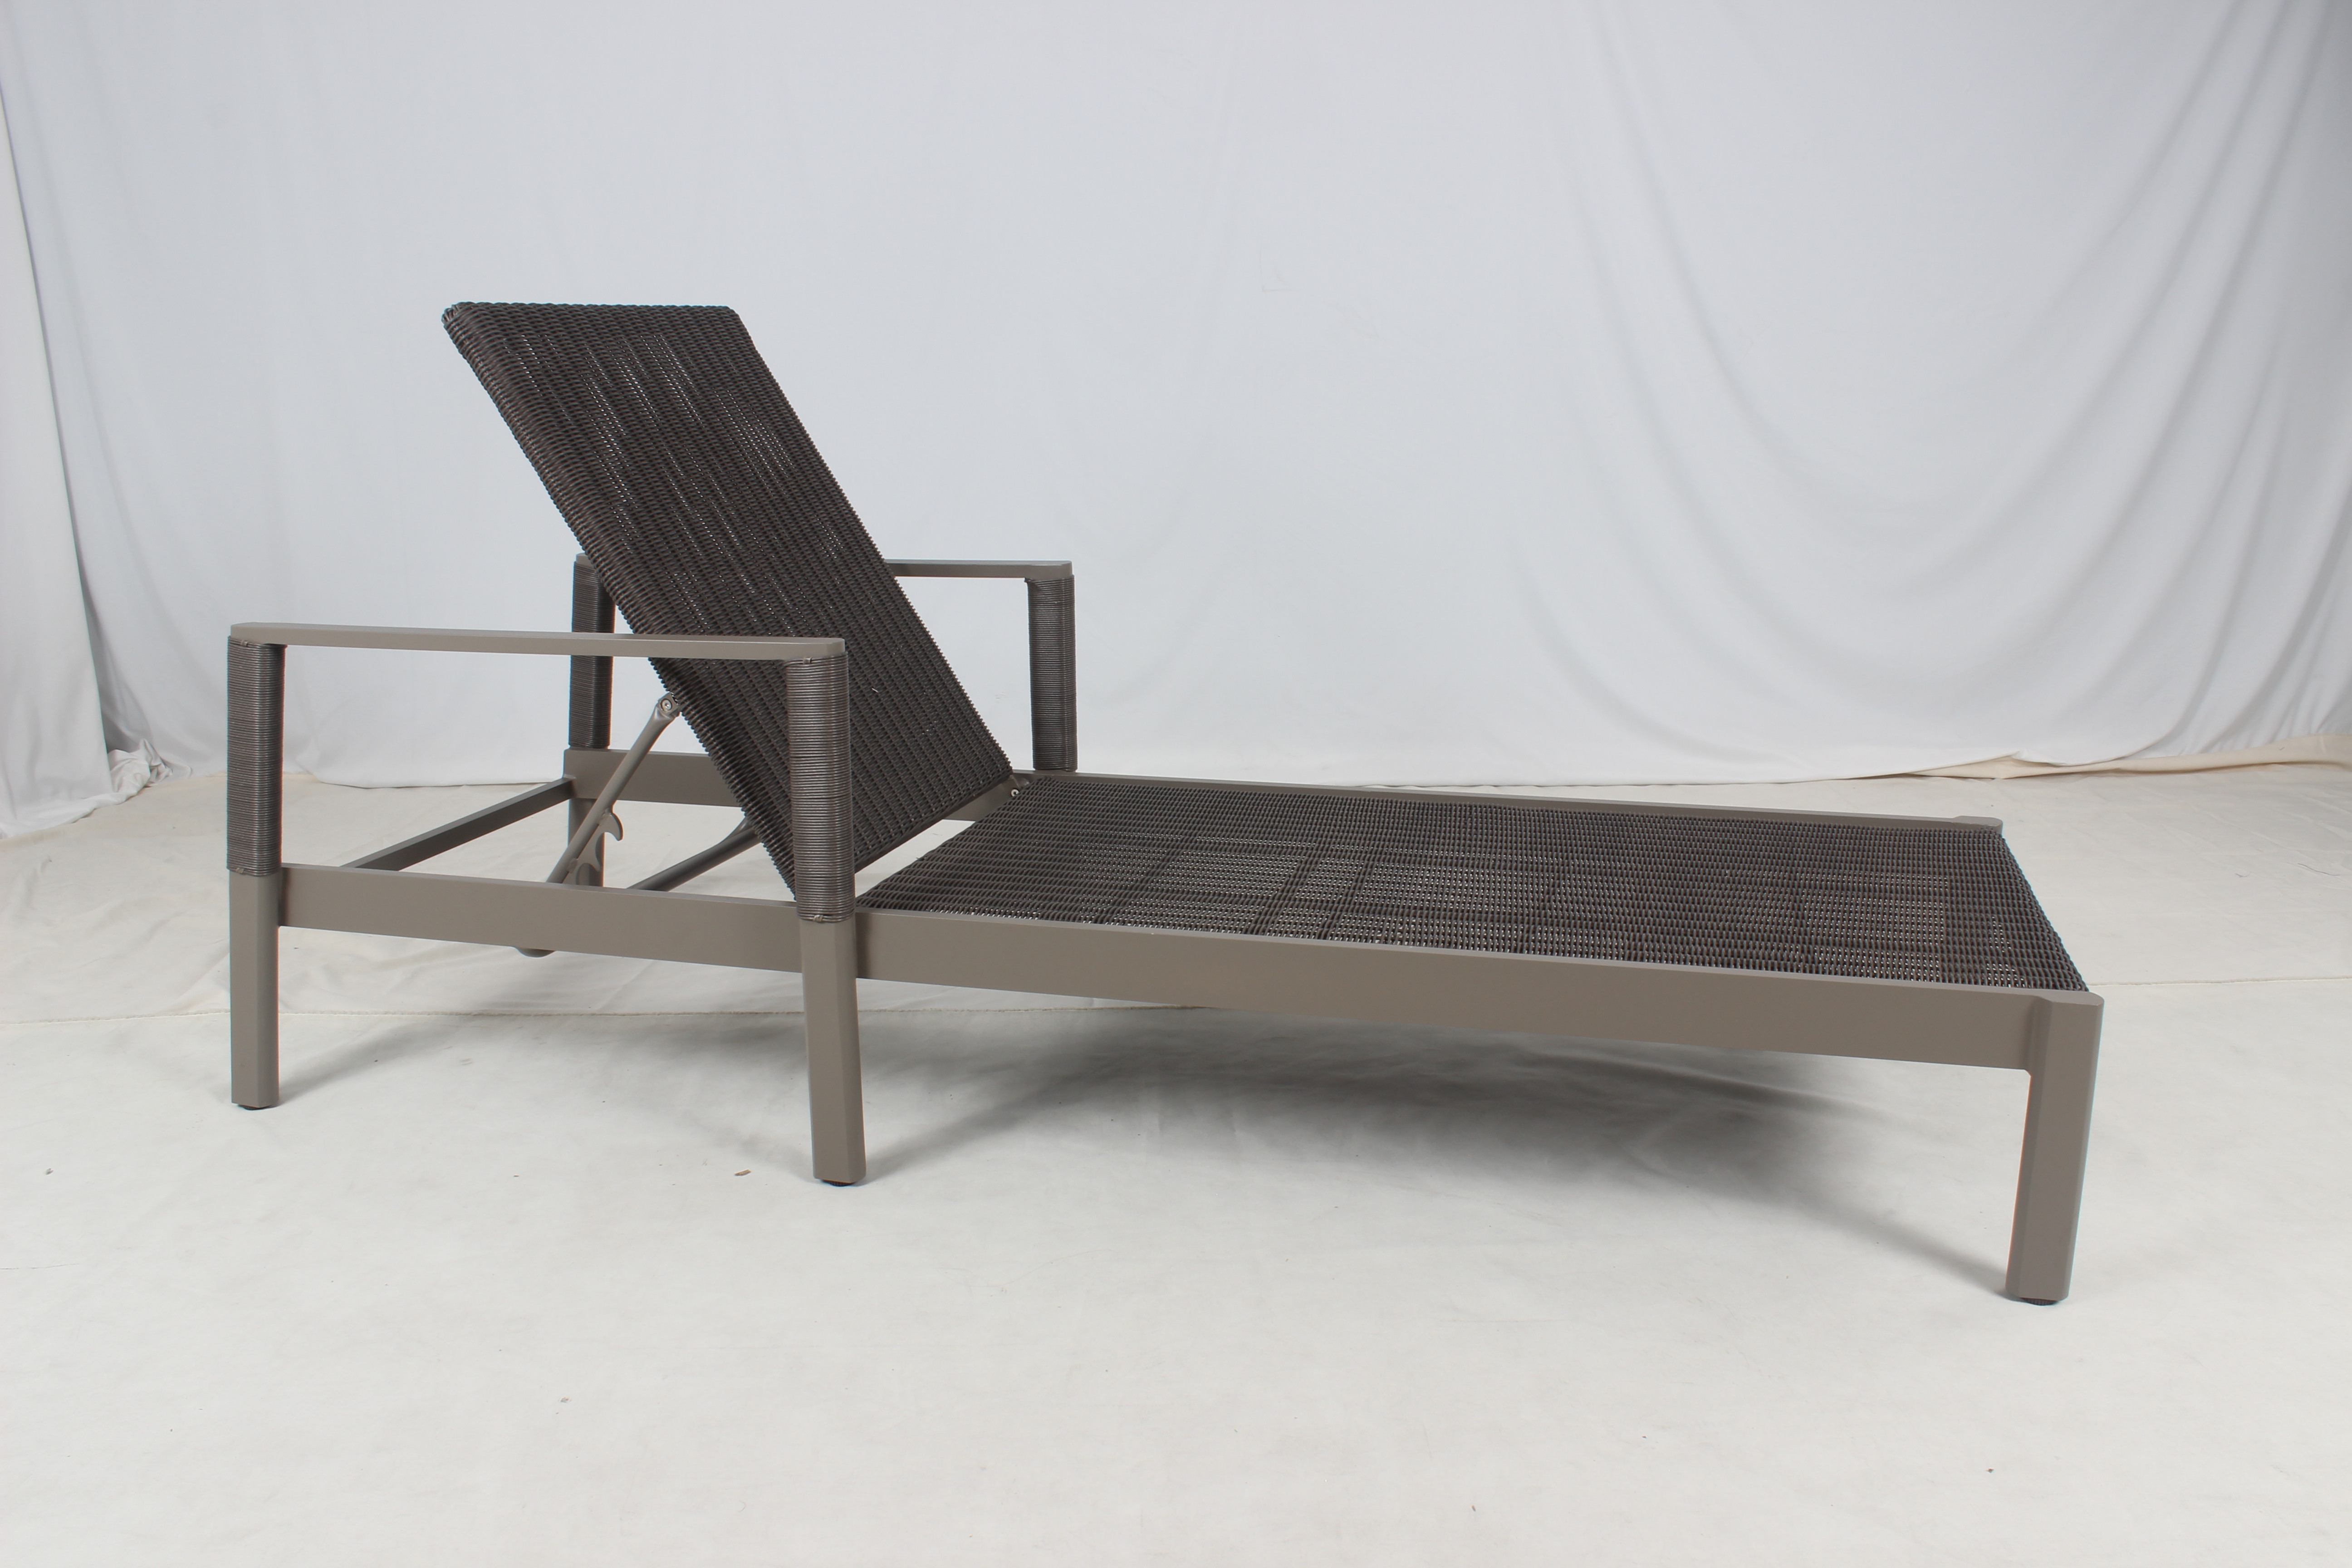 Outdoor wicker patio lounger with armrest